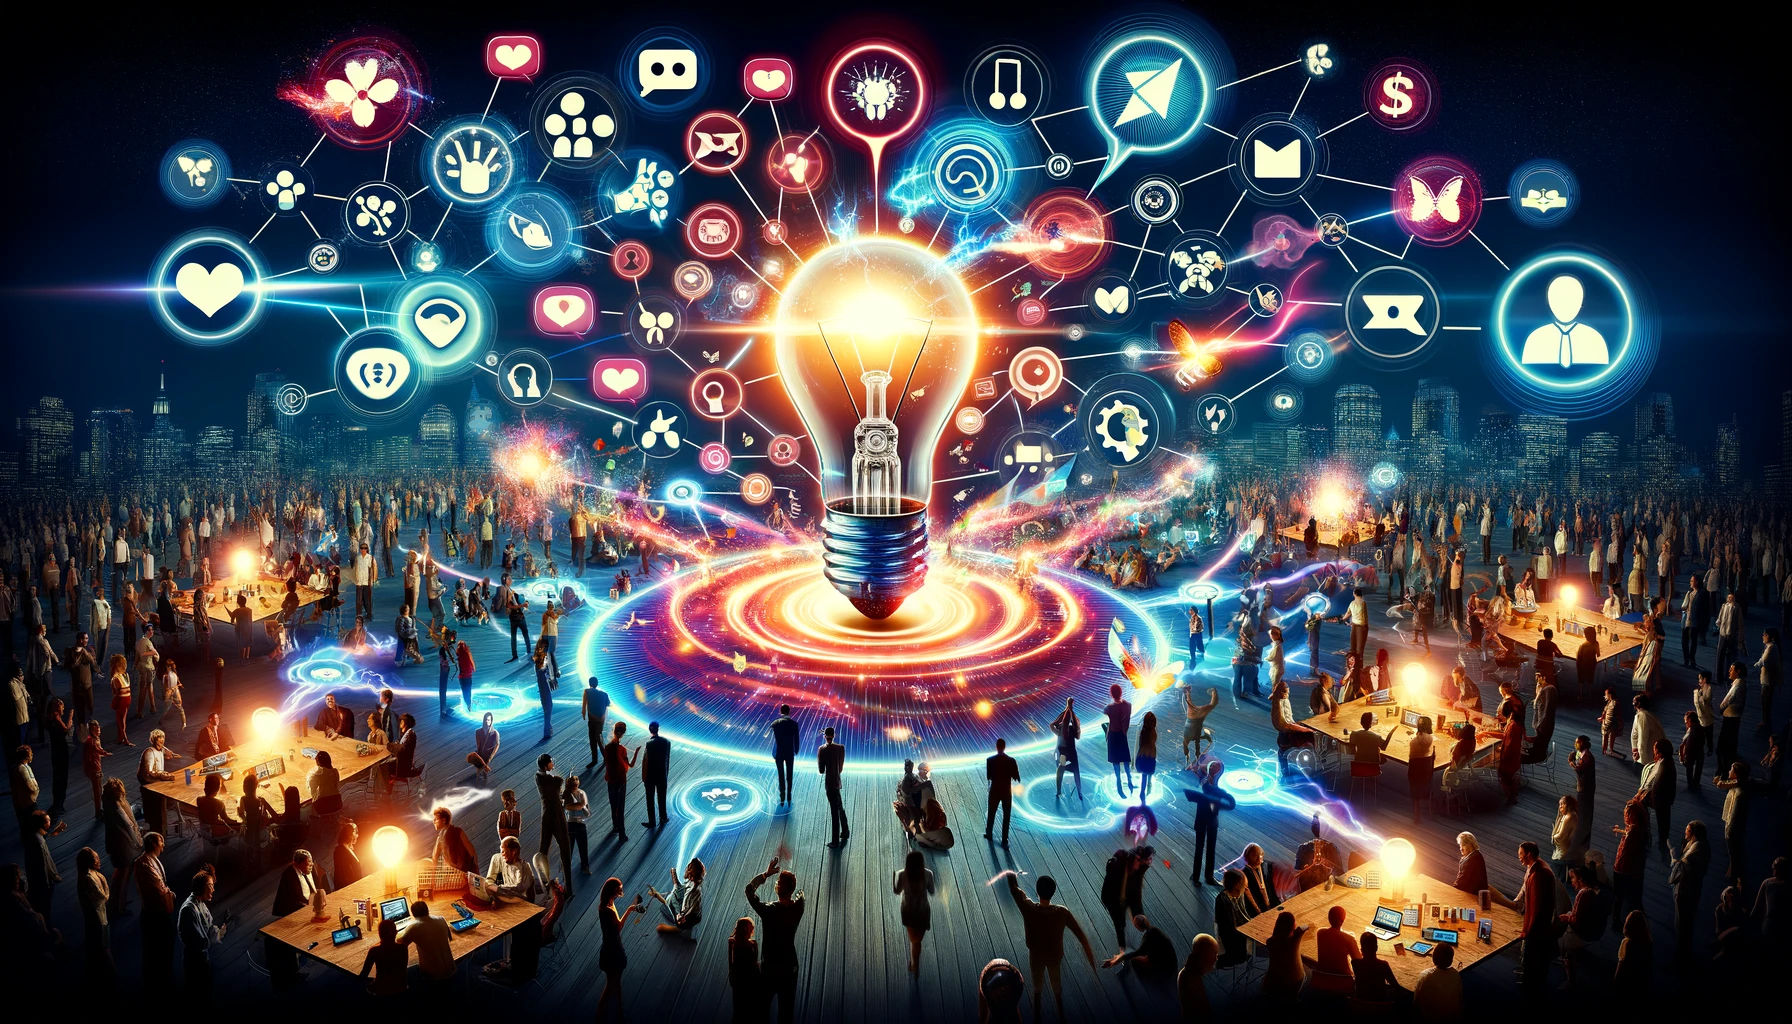 A vibrant scene of buzz marketing strategies with people engaging in conversations, social media shares, and public demonstrations around a central innovative idea.